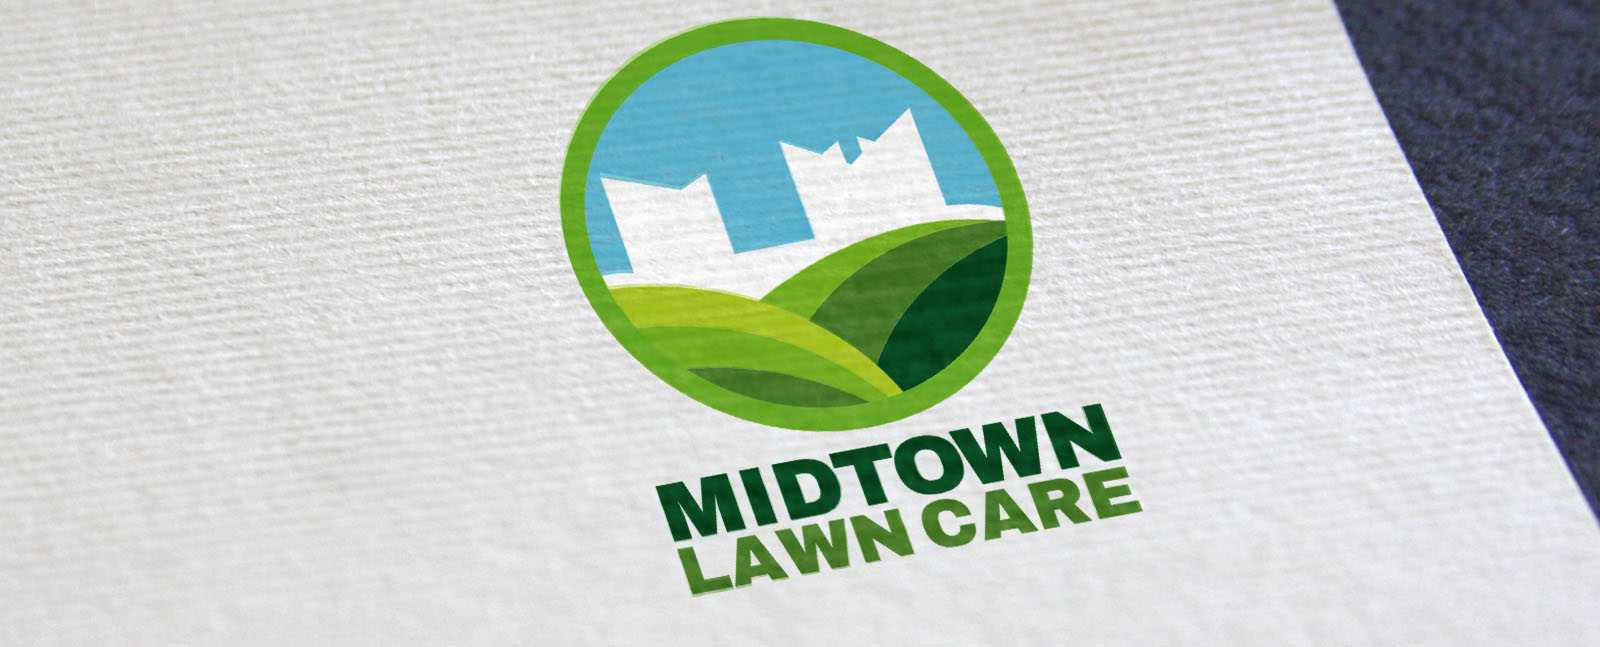 Example of a lawn care logo design for Midtown Lawn Care.